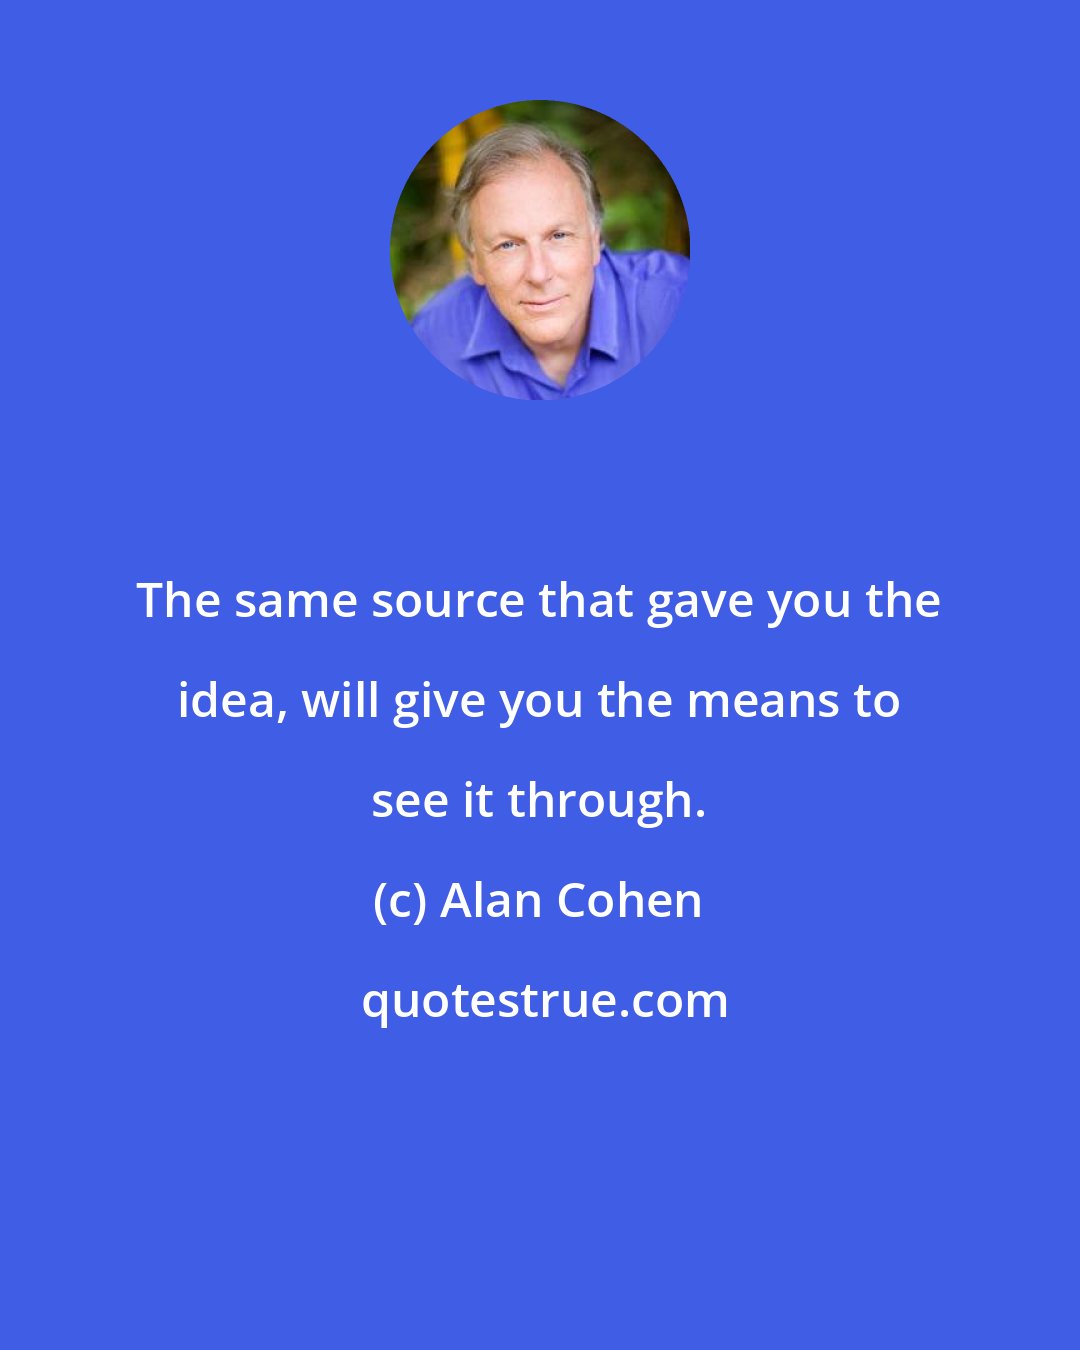 Alan Cohen: The same source that gave you the idea, will give you the means to see it through.